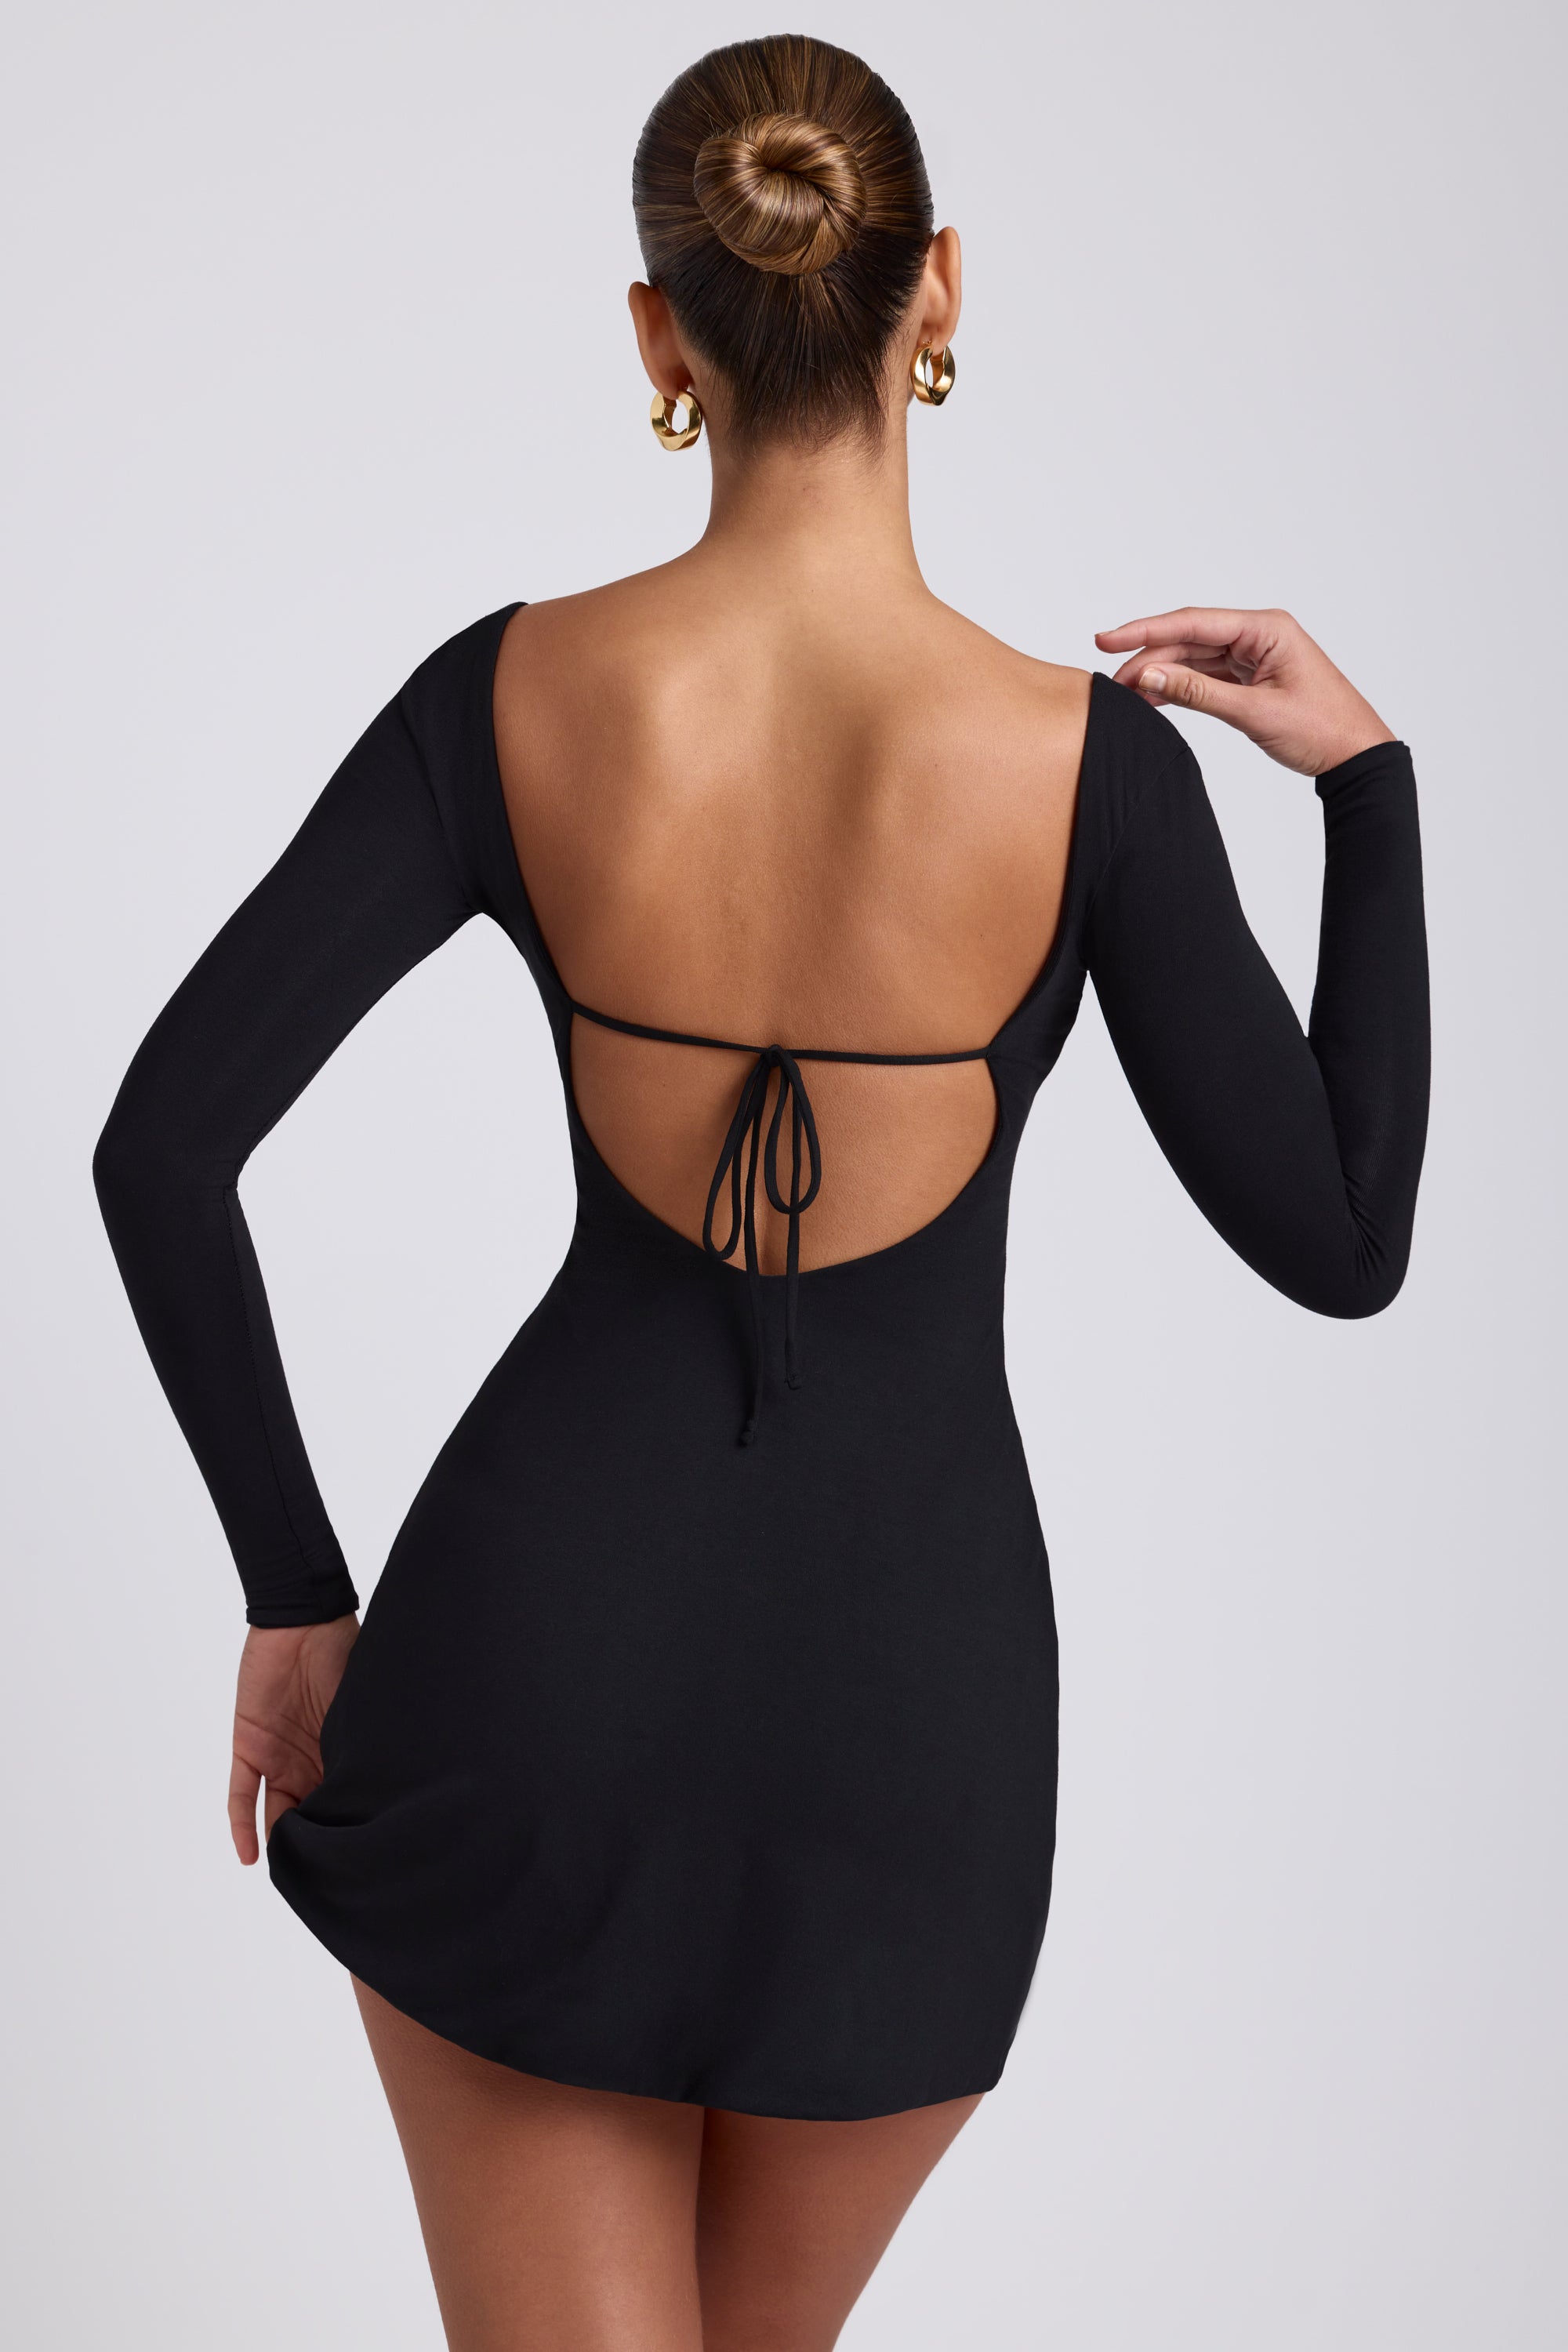 5 tips for wearing a backless dress with or without a bra – backcartel.com